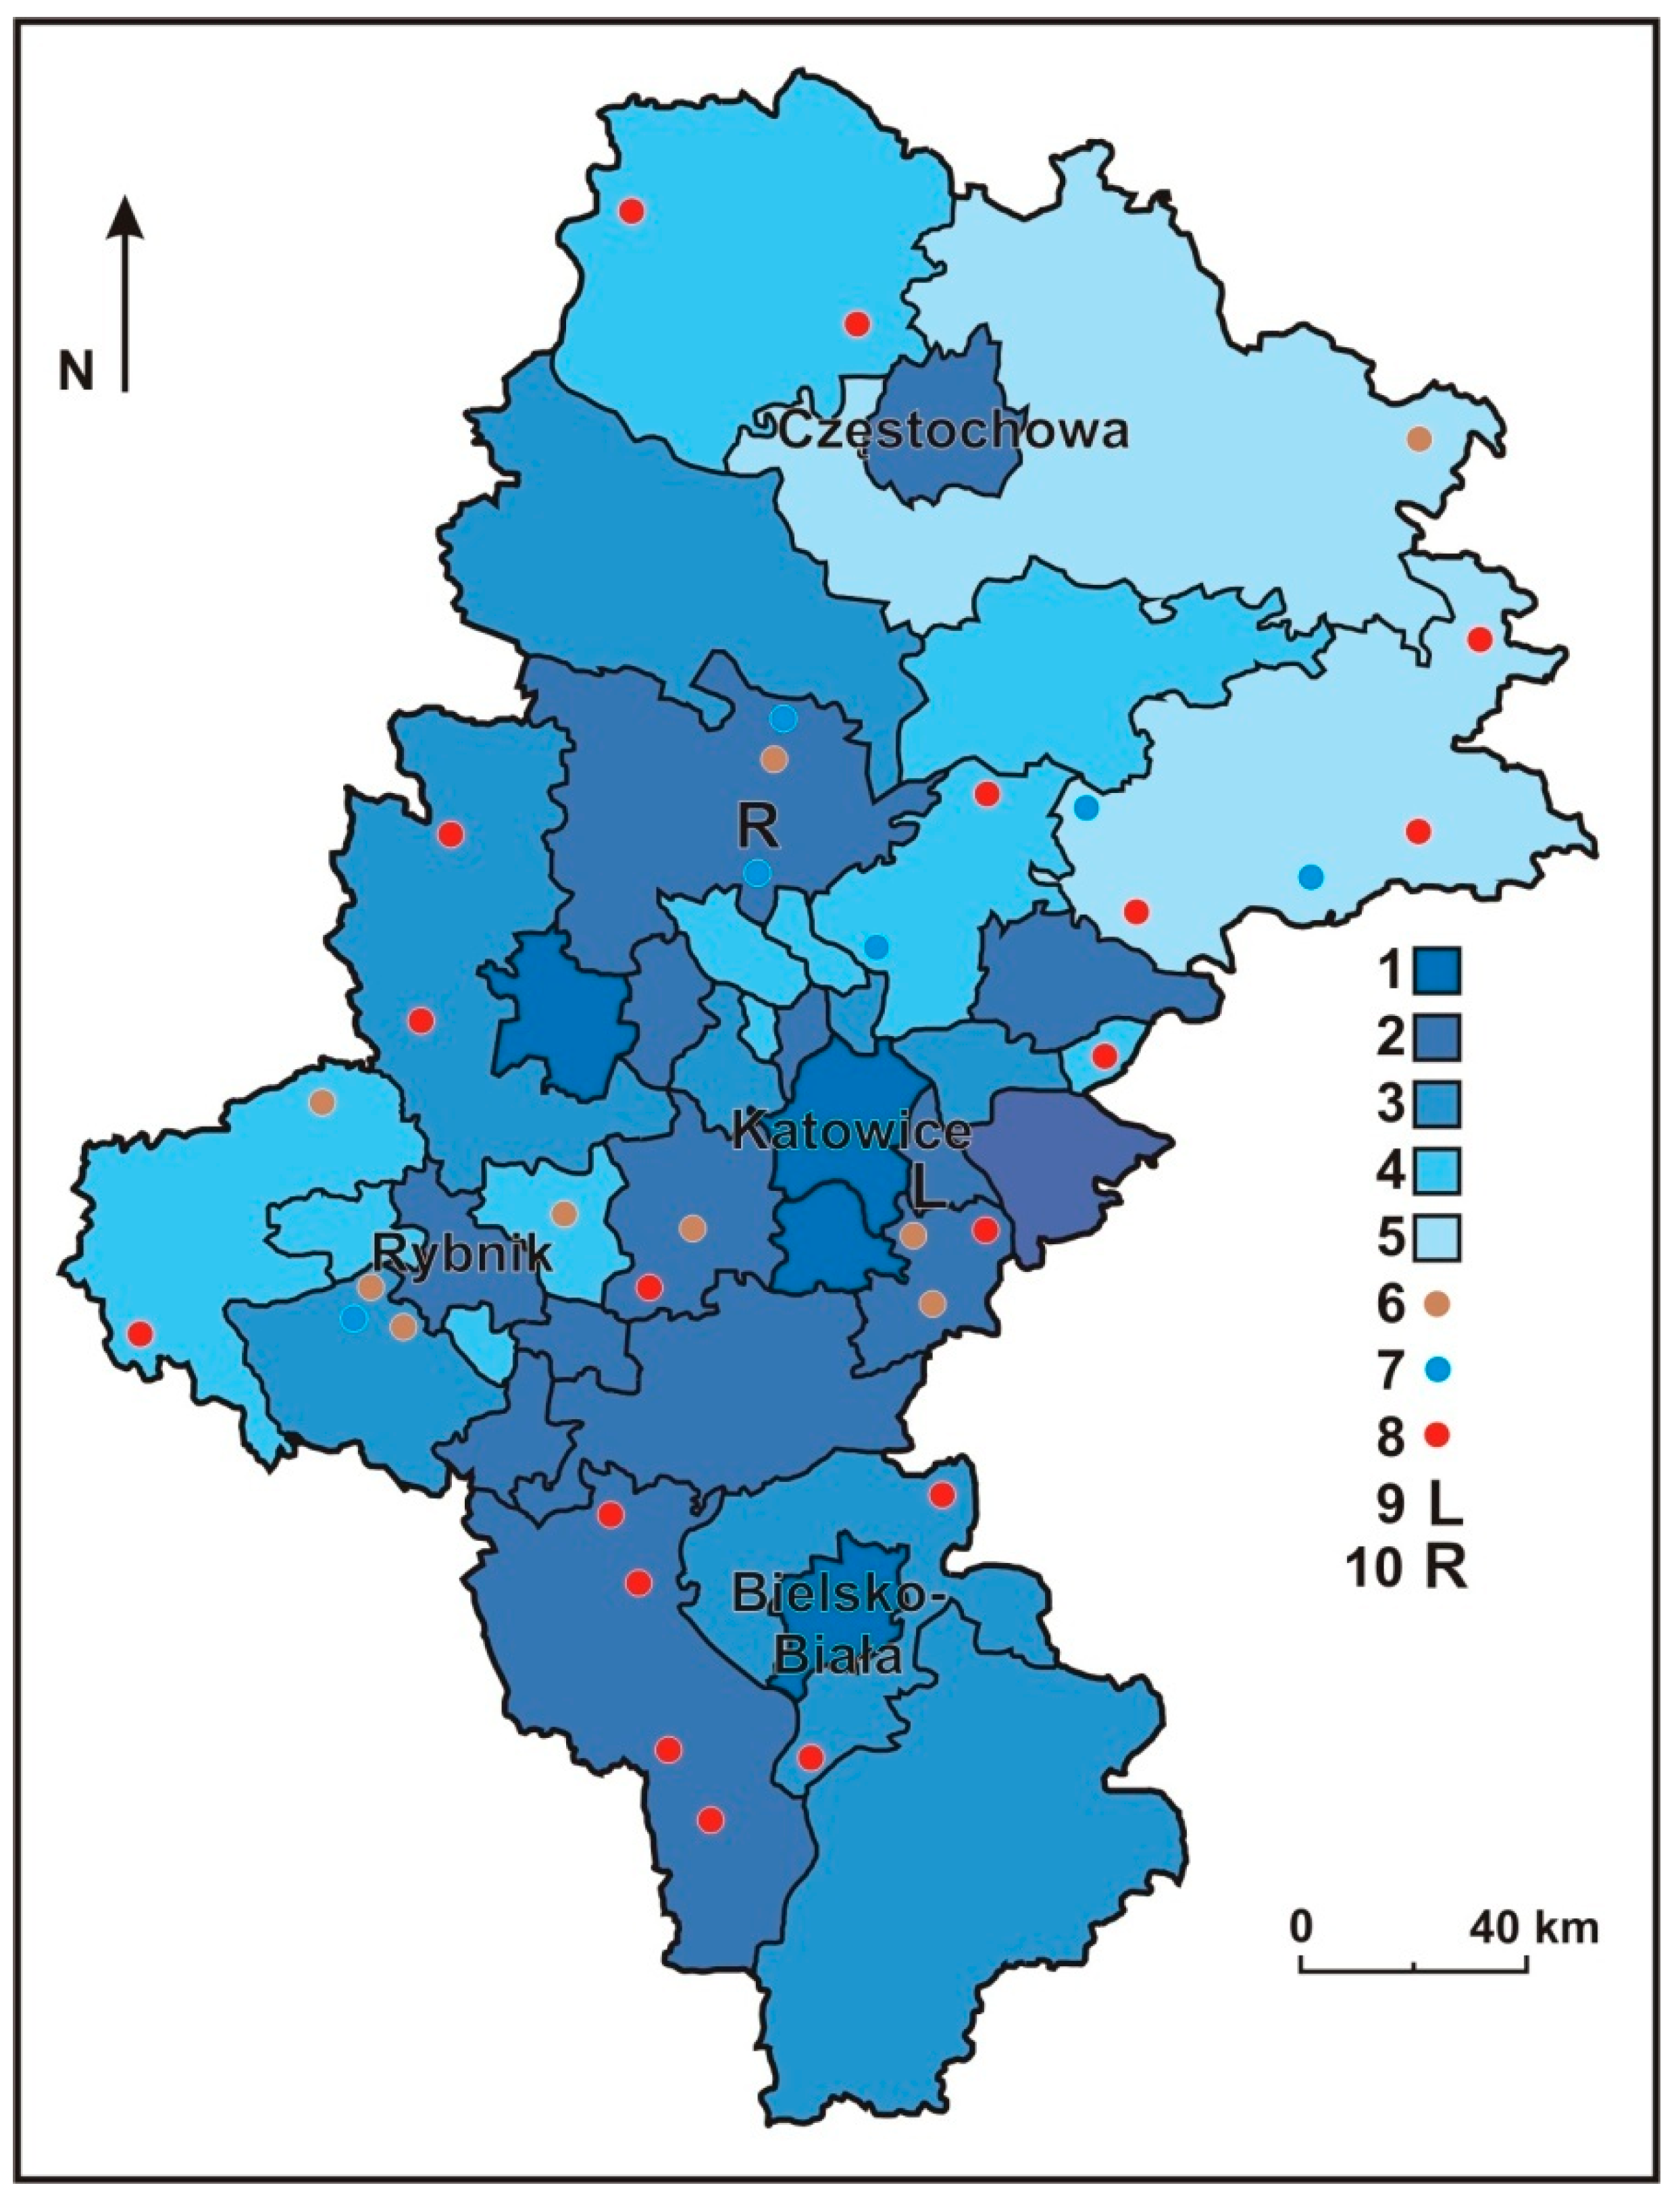 Urban Science | Free Full-Text | Between Industrialism and  Postindustrialism—the Case of Small Towns in a Large Urban Region: The  Katowice Conurbation, Poland | HTML